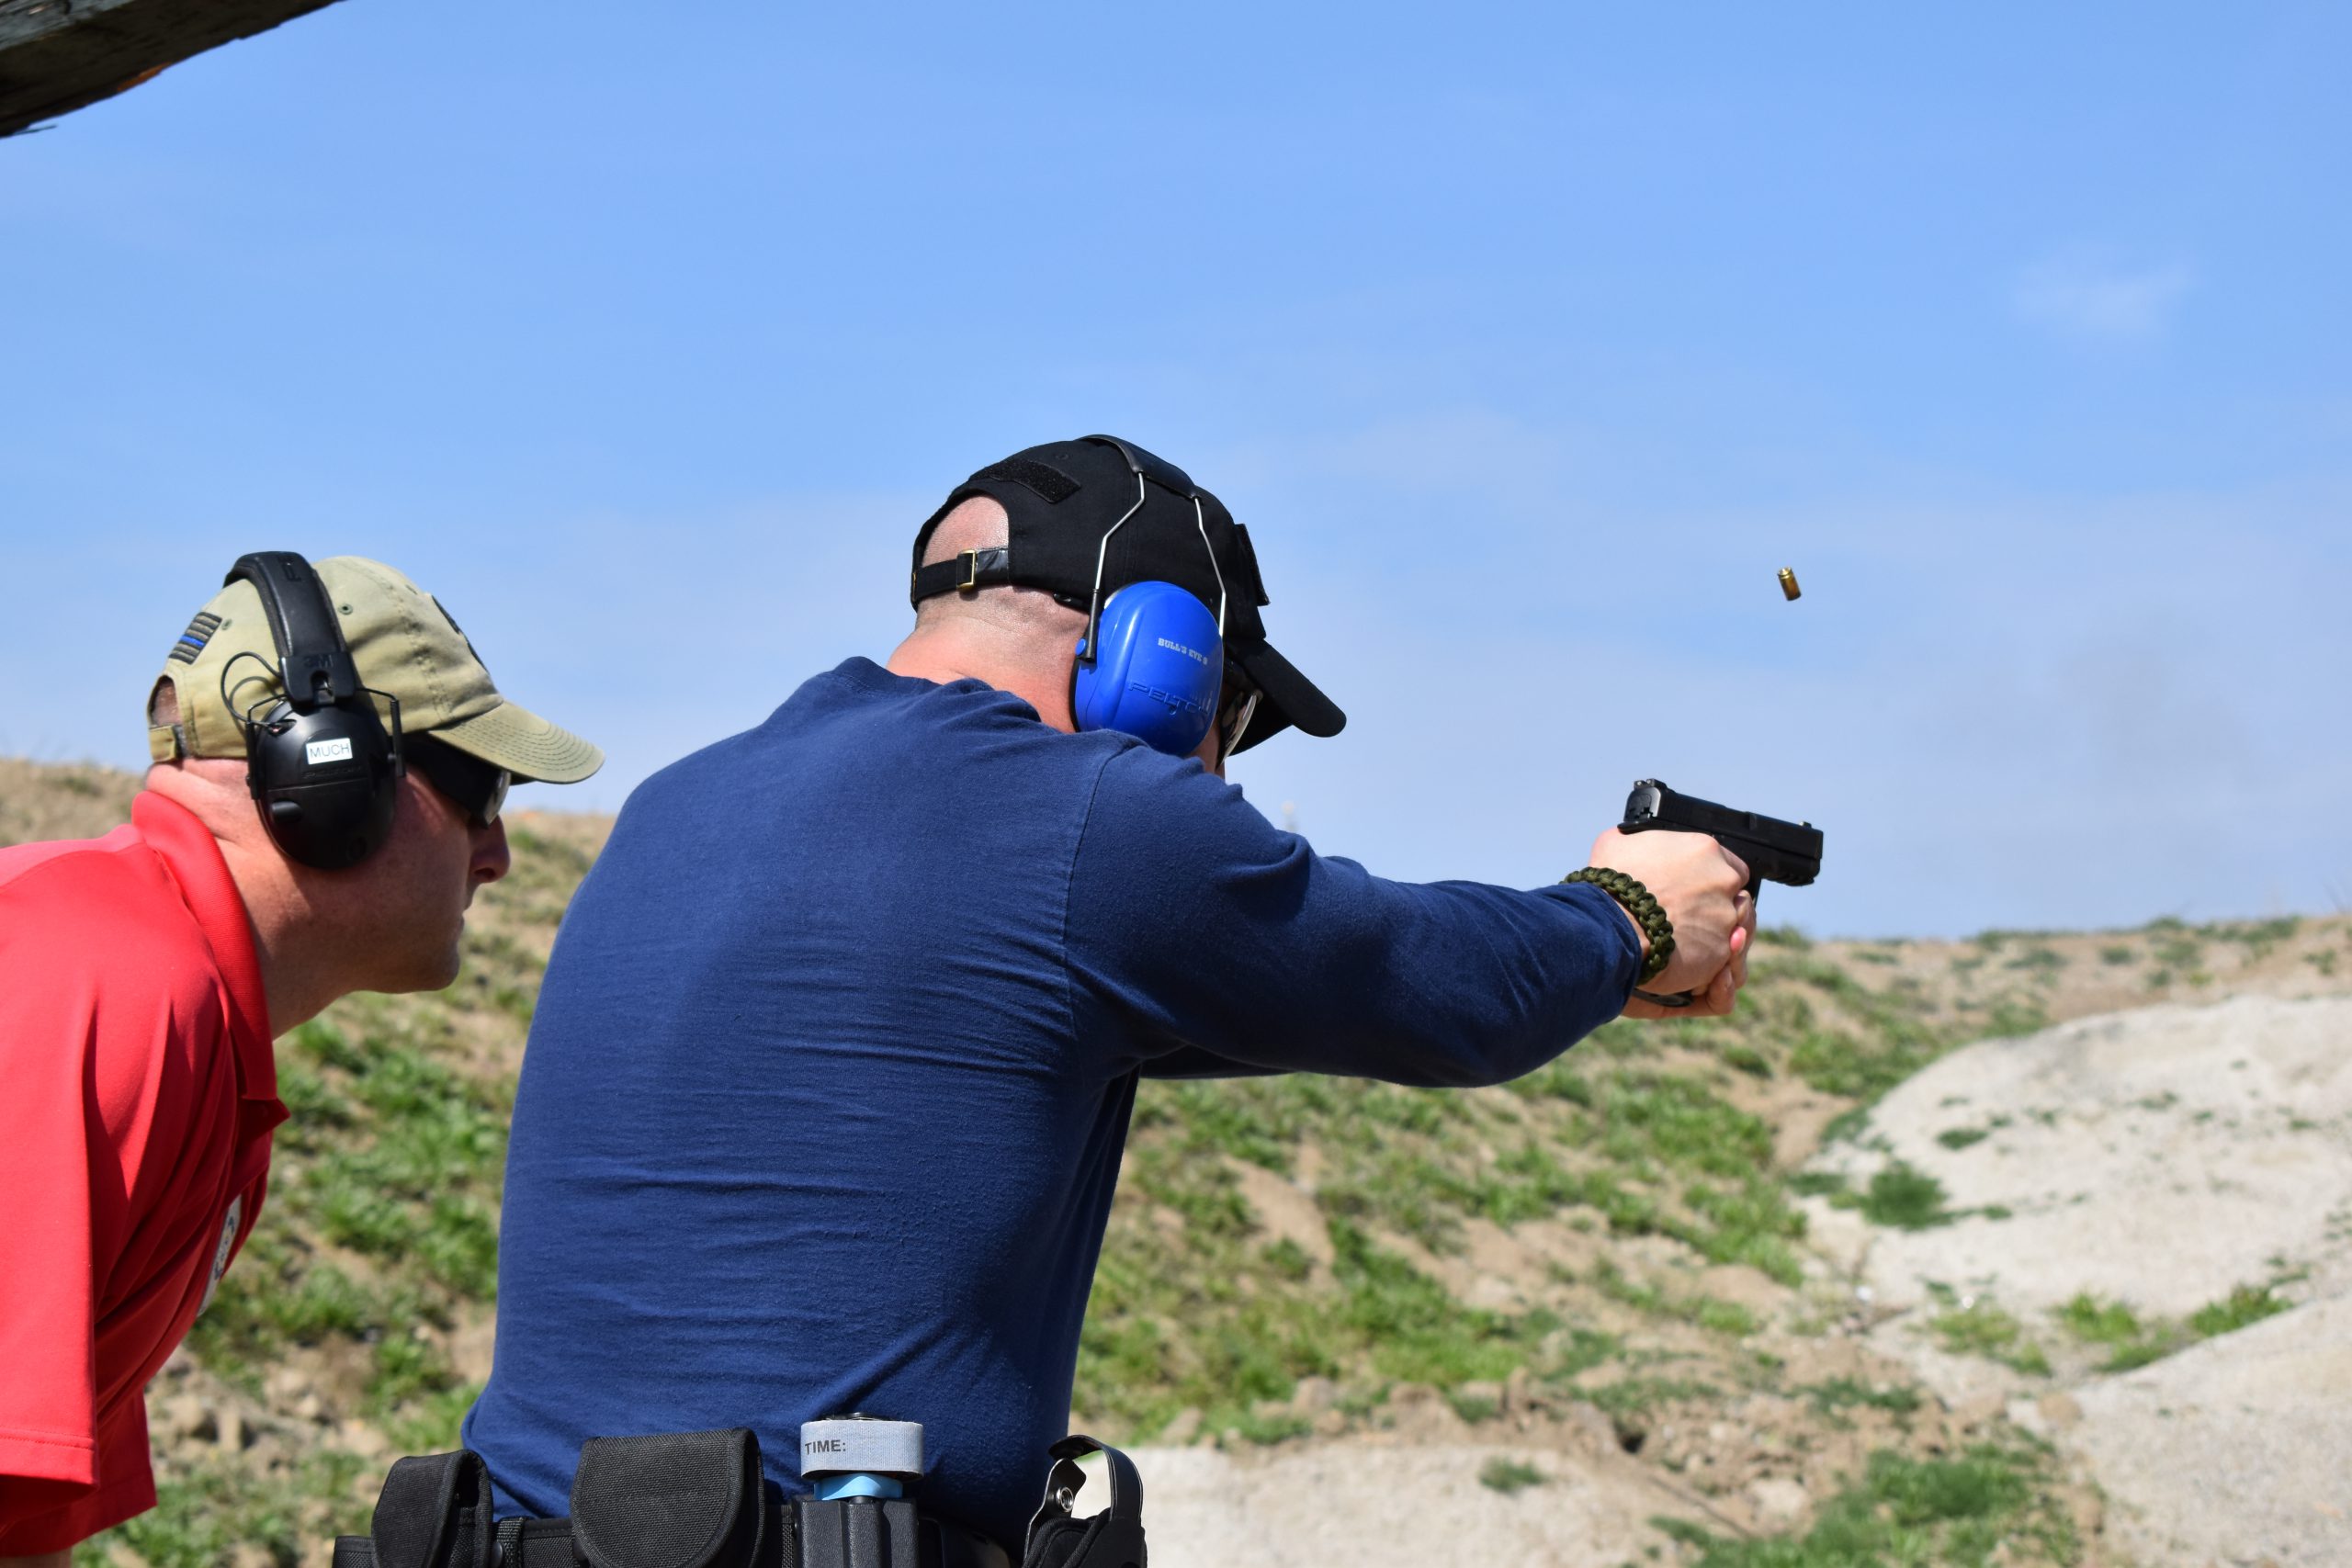 Security officers training at outside gun range